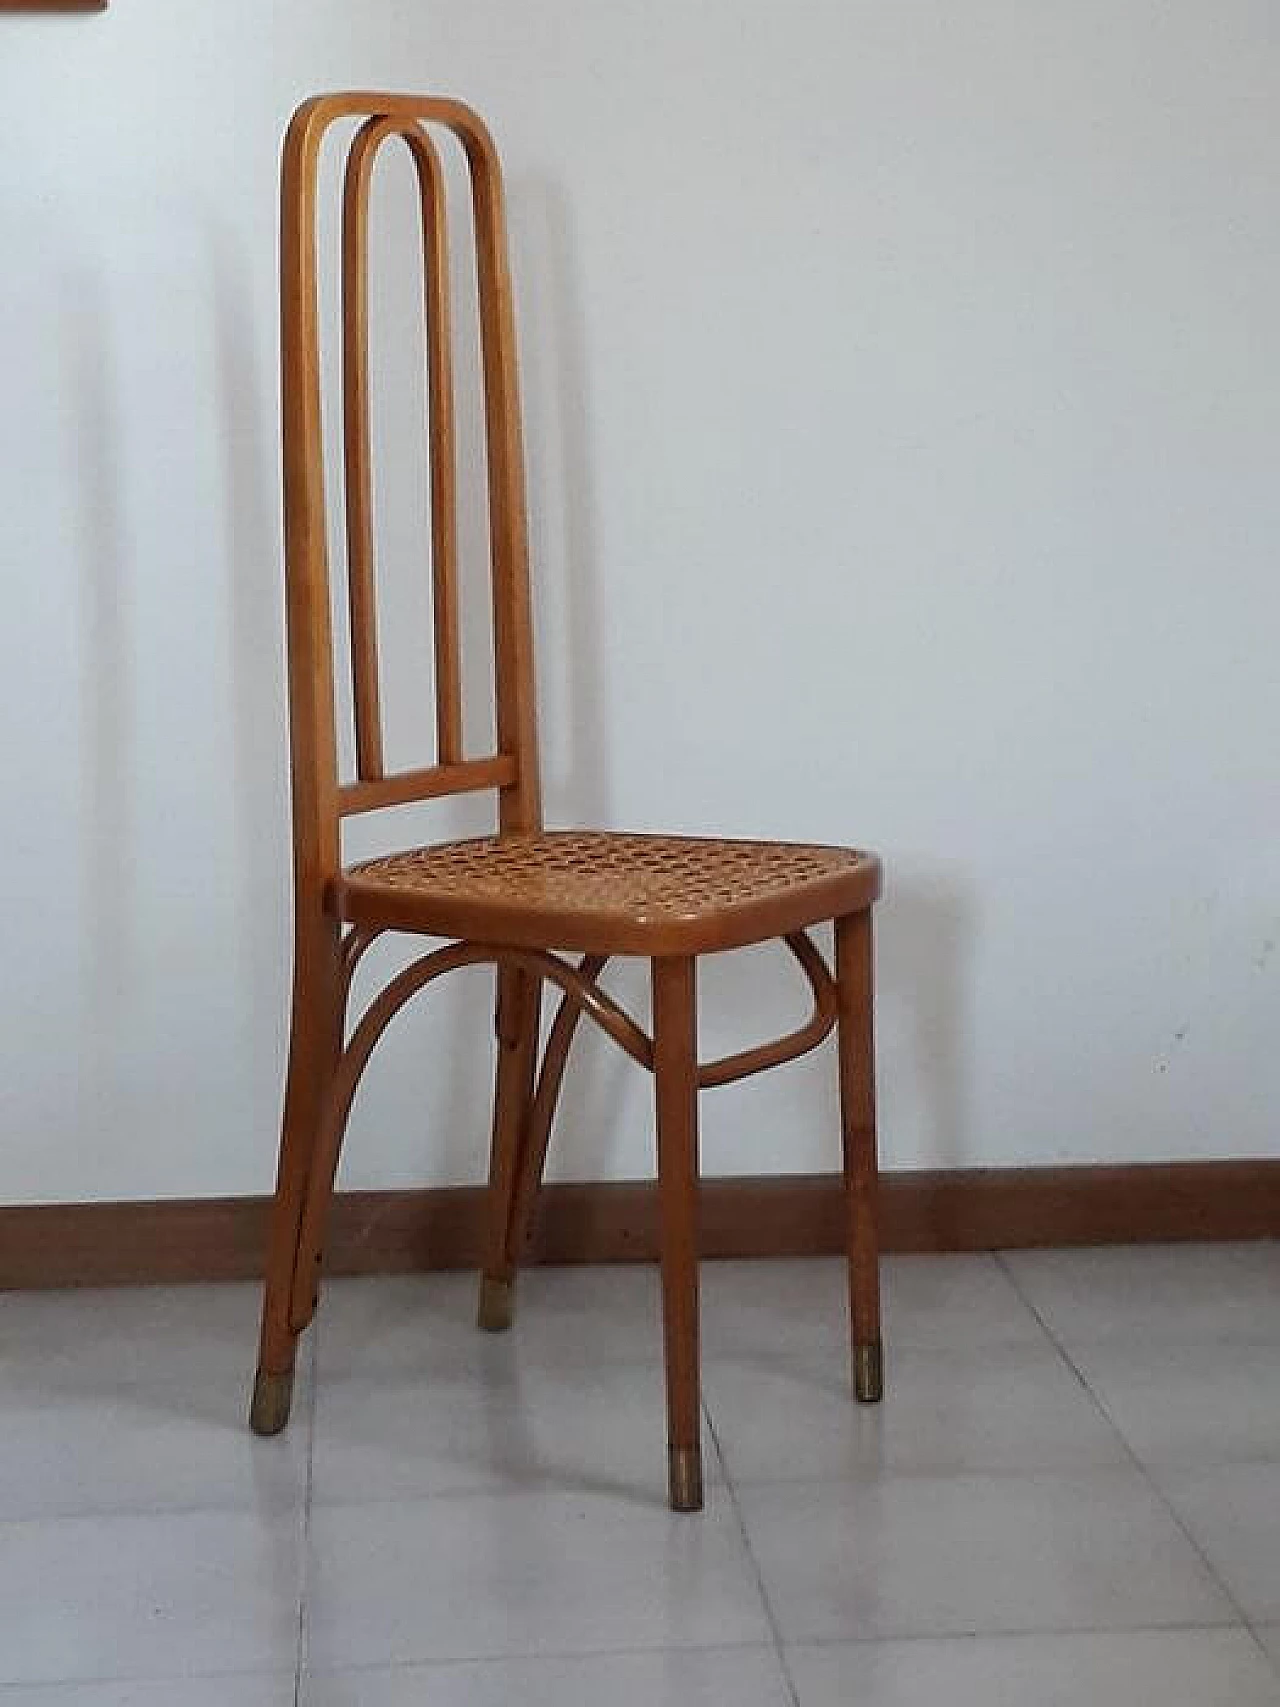 Chair 246 in blond beech manufactured by Società Antonio Volpe, 20th century 11